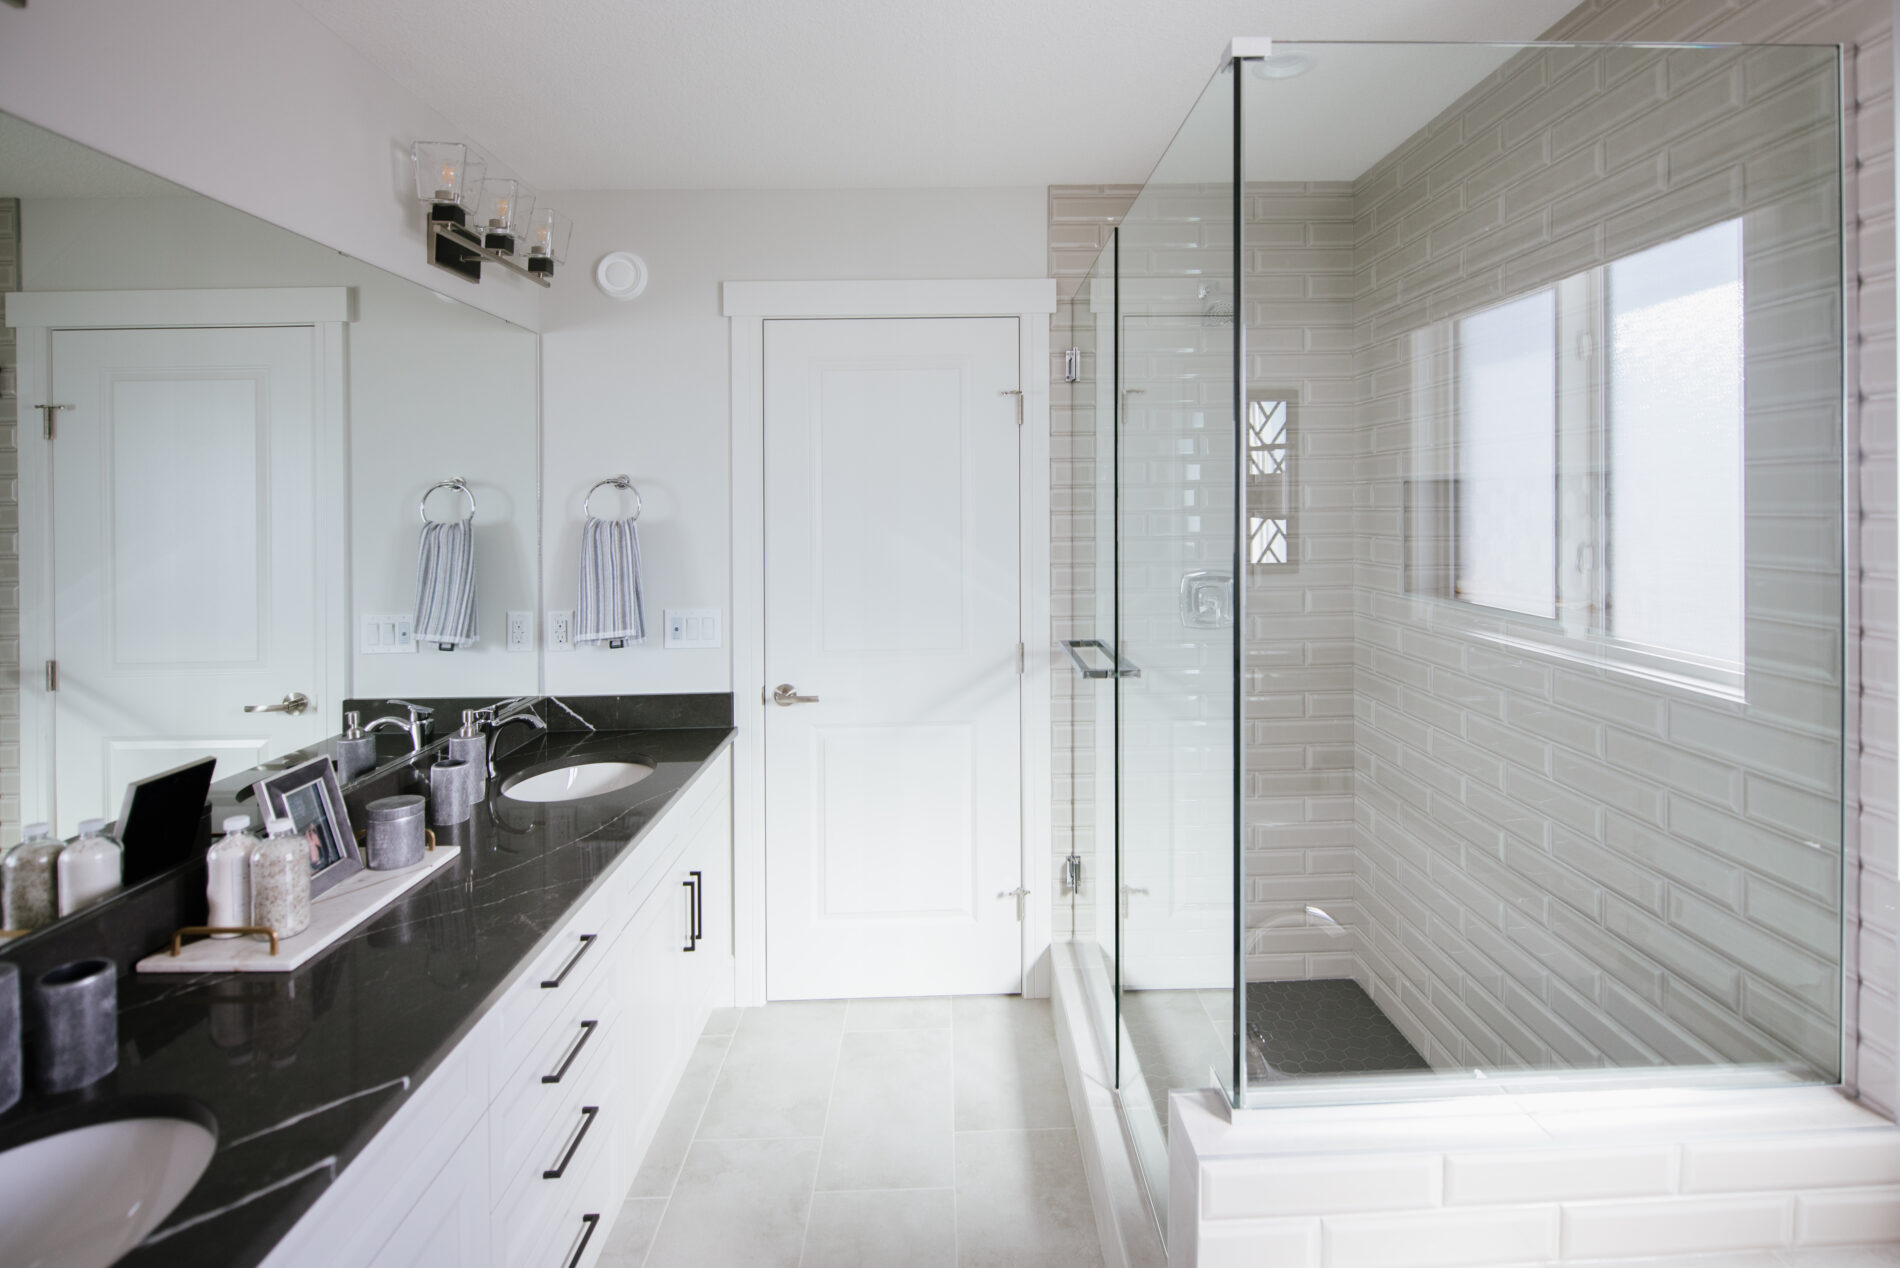 A bright ensuite with white cabinets, dark countertops, fully tiled shower and soaker tub